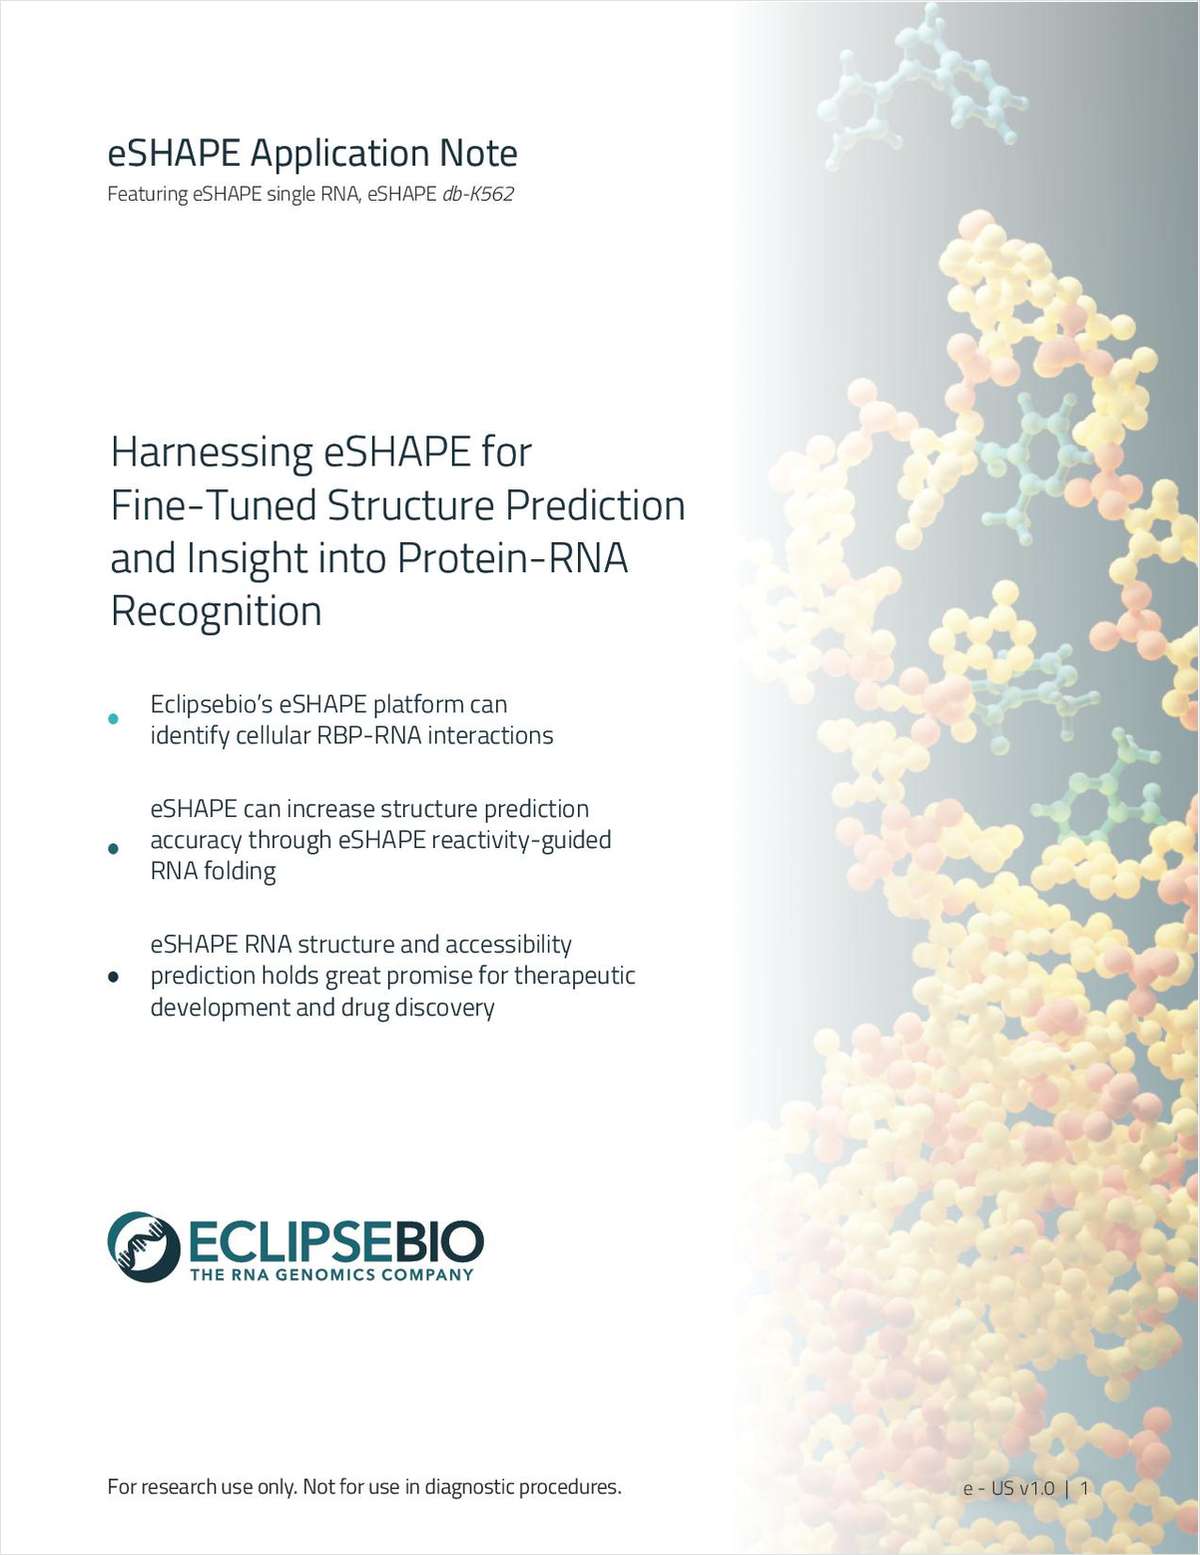 Harnessing eSHAPE for Fine-Tuned Structure Prediction and Insight Into Protein-RNA Recognition